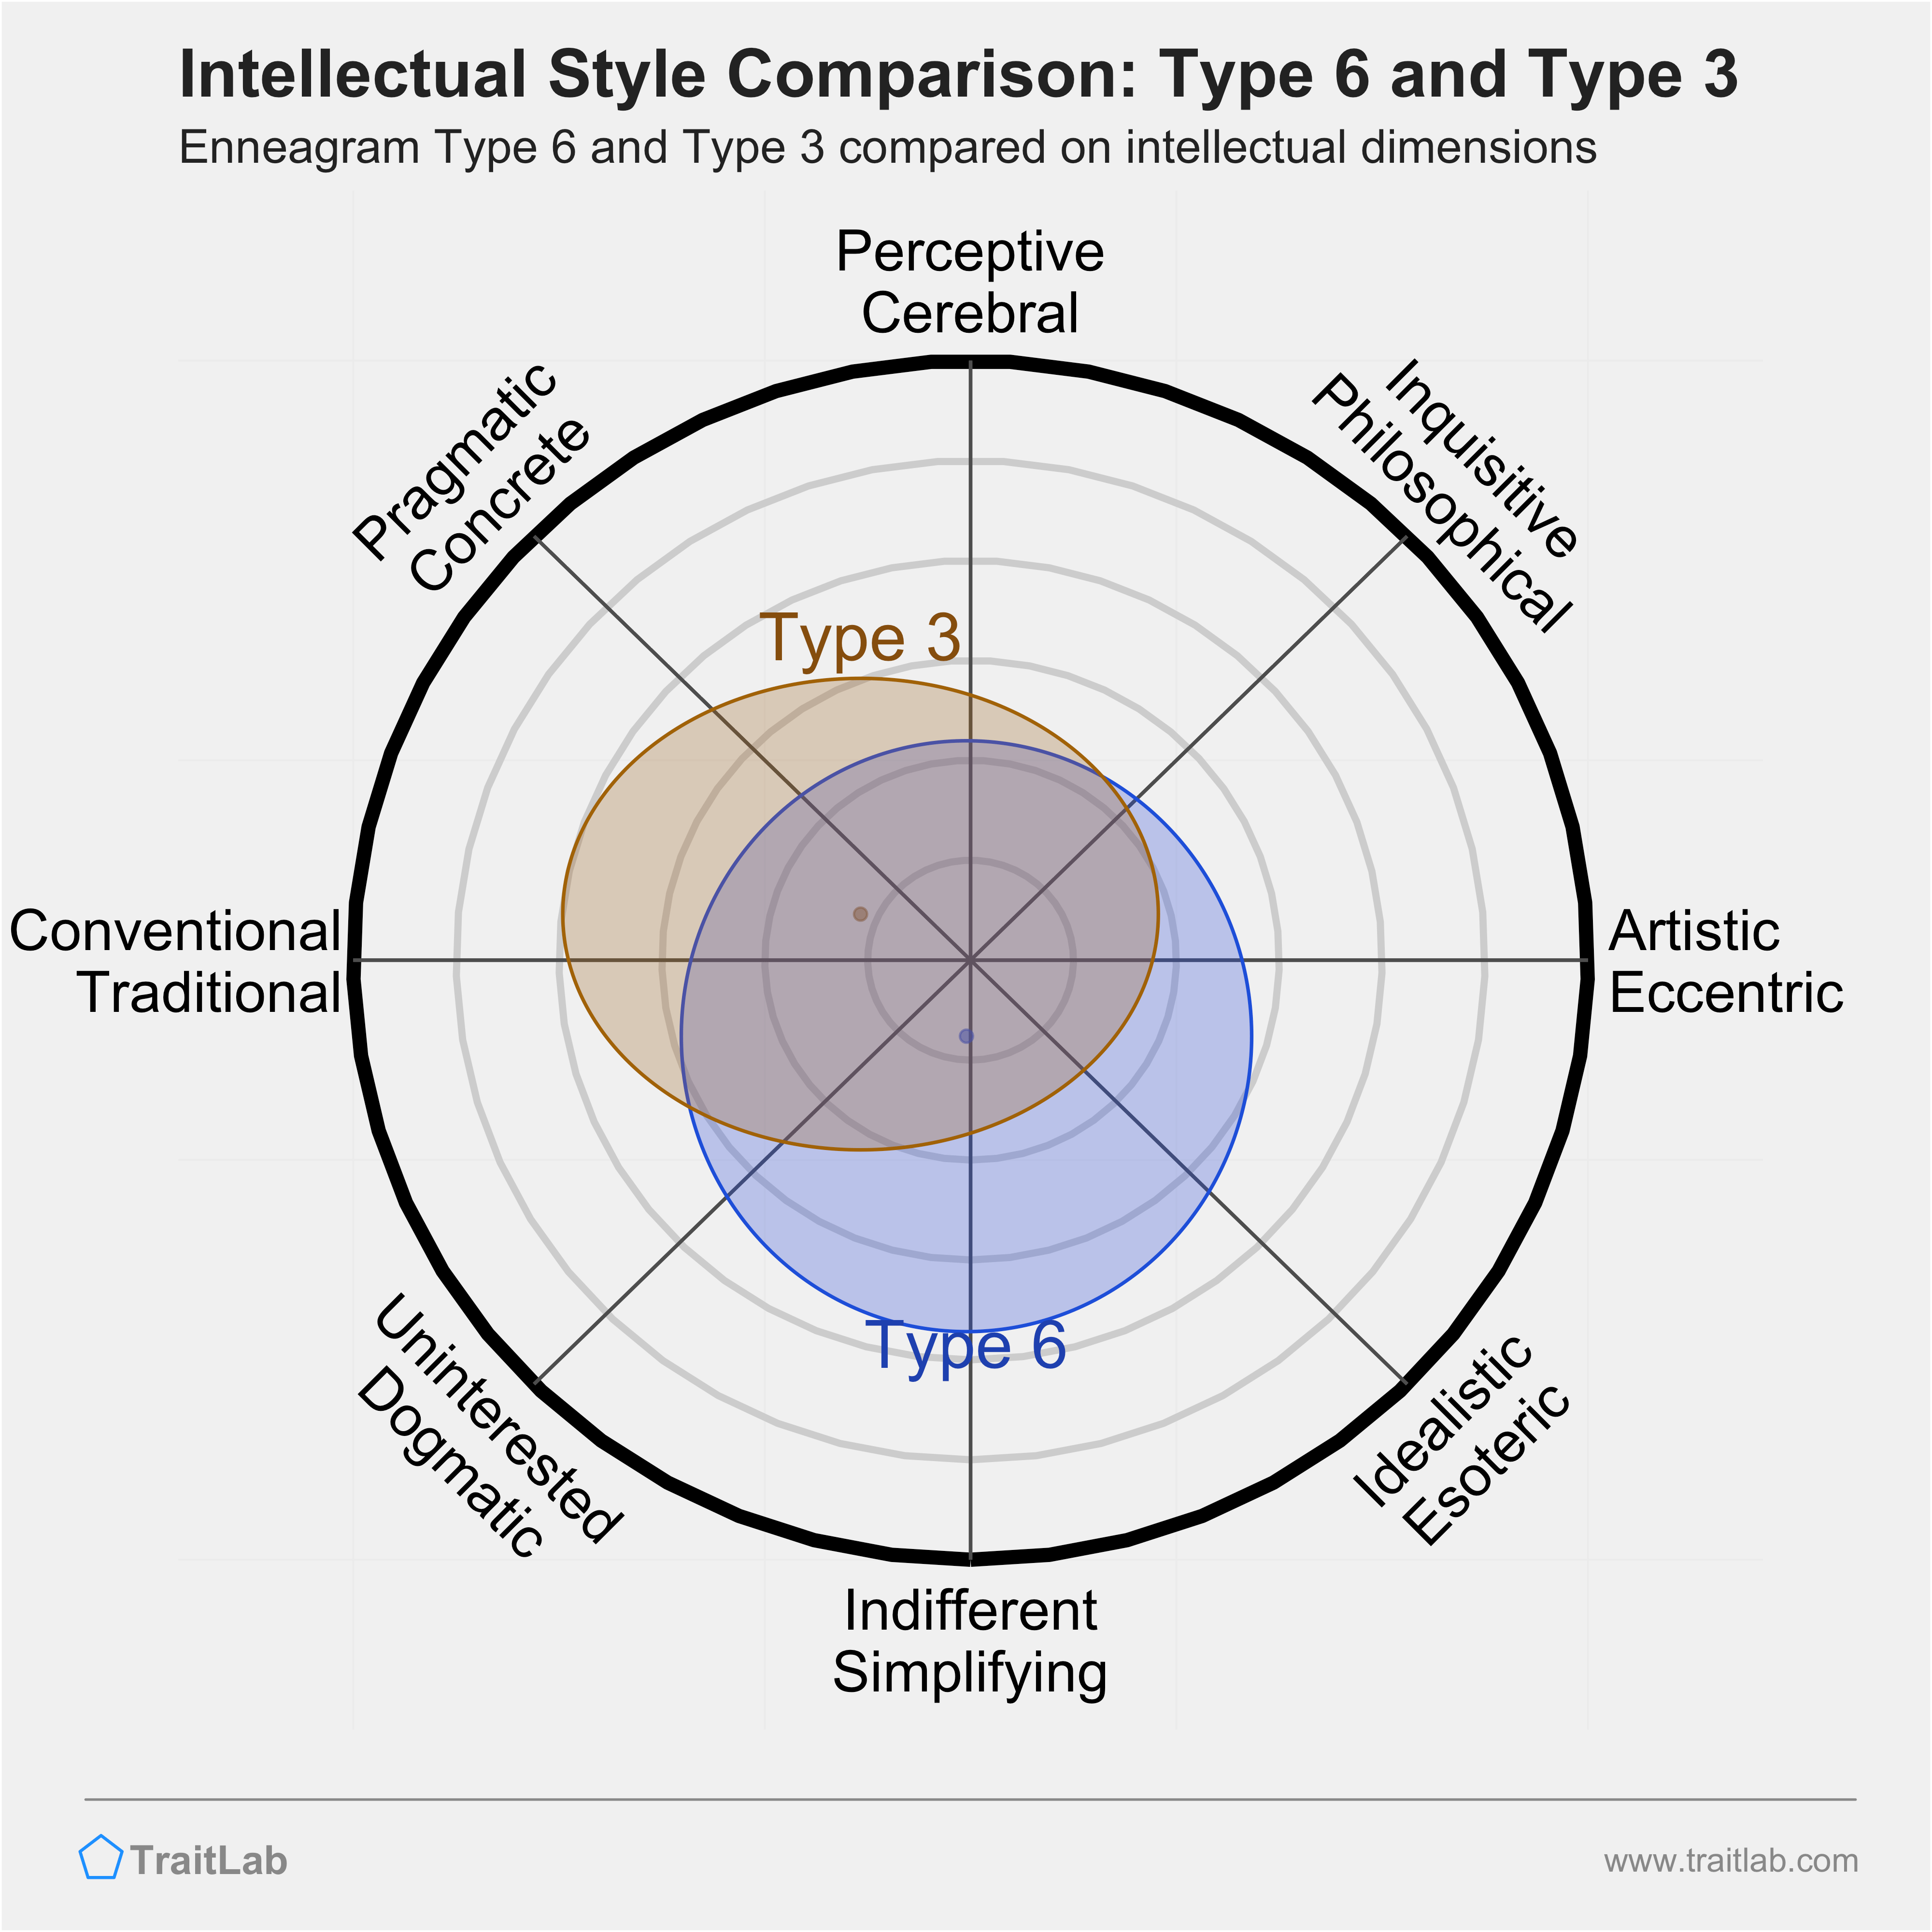 Type 6 and Type 3 comparison across intellectual dimensions